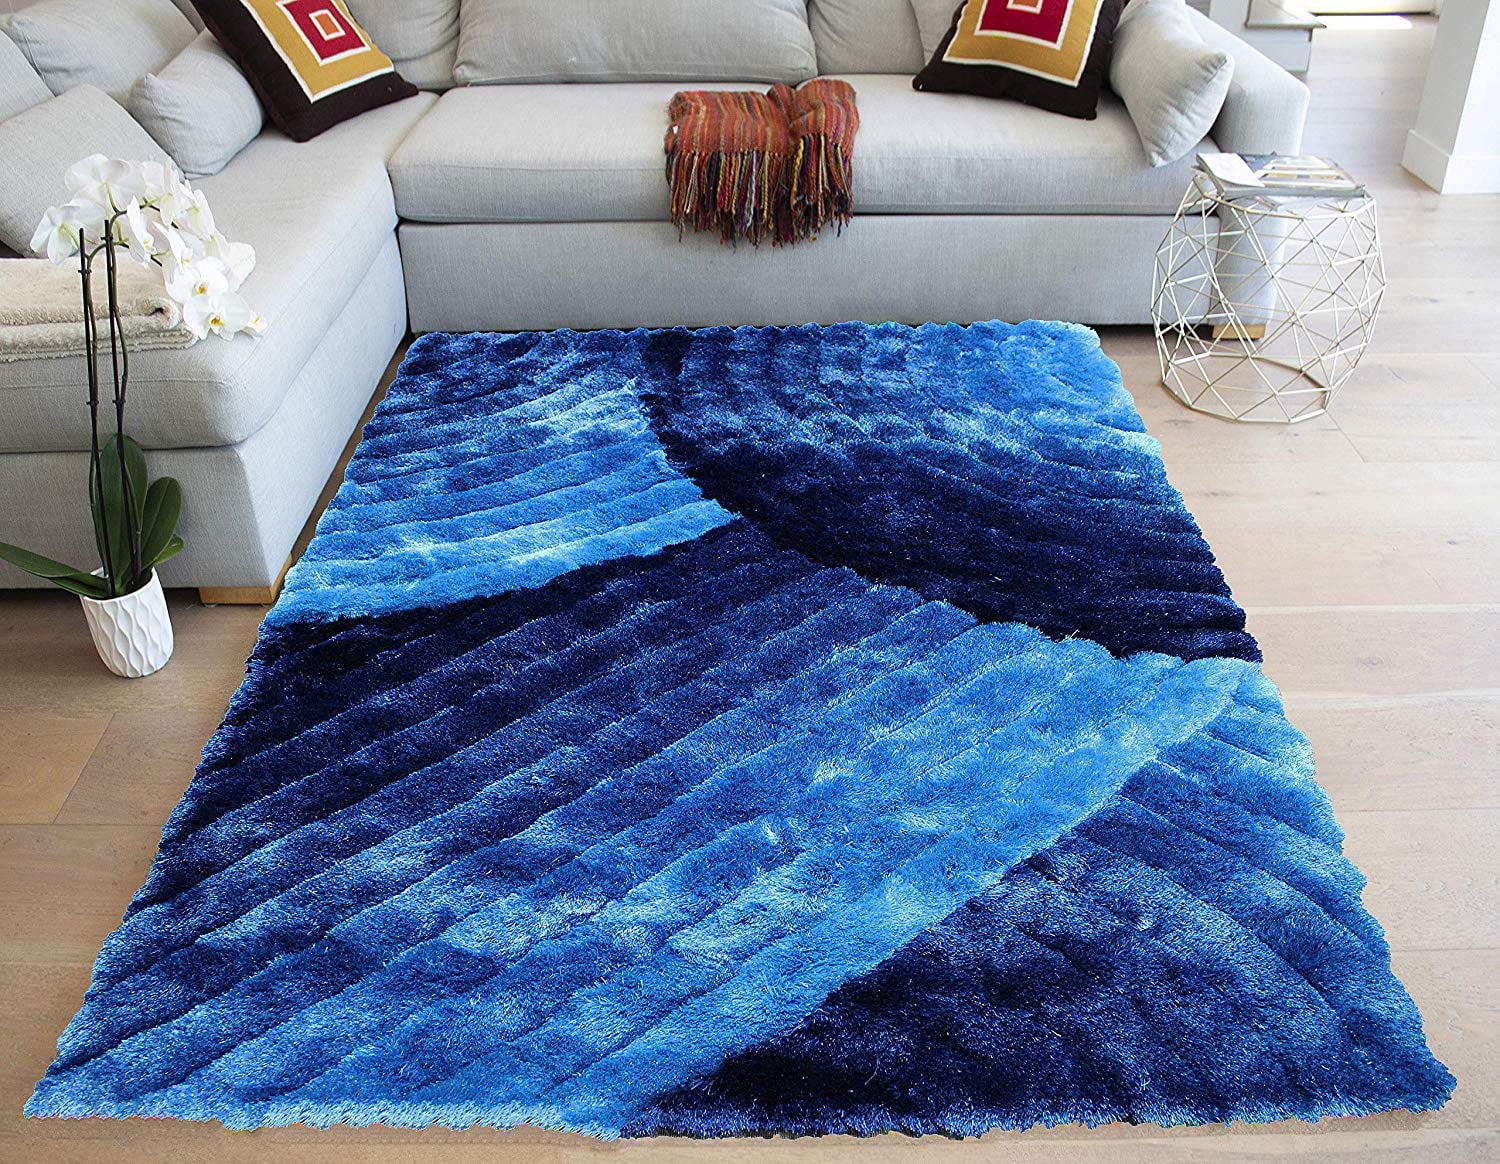 Big Shaggy Rugs For Living Room